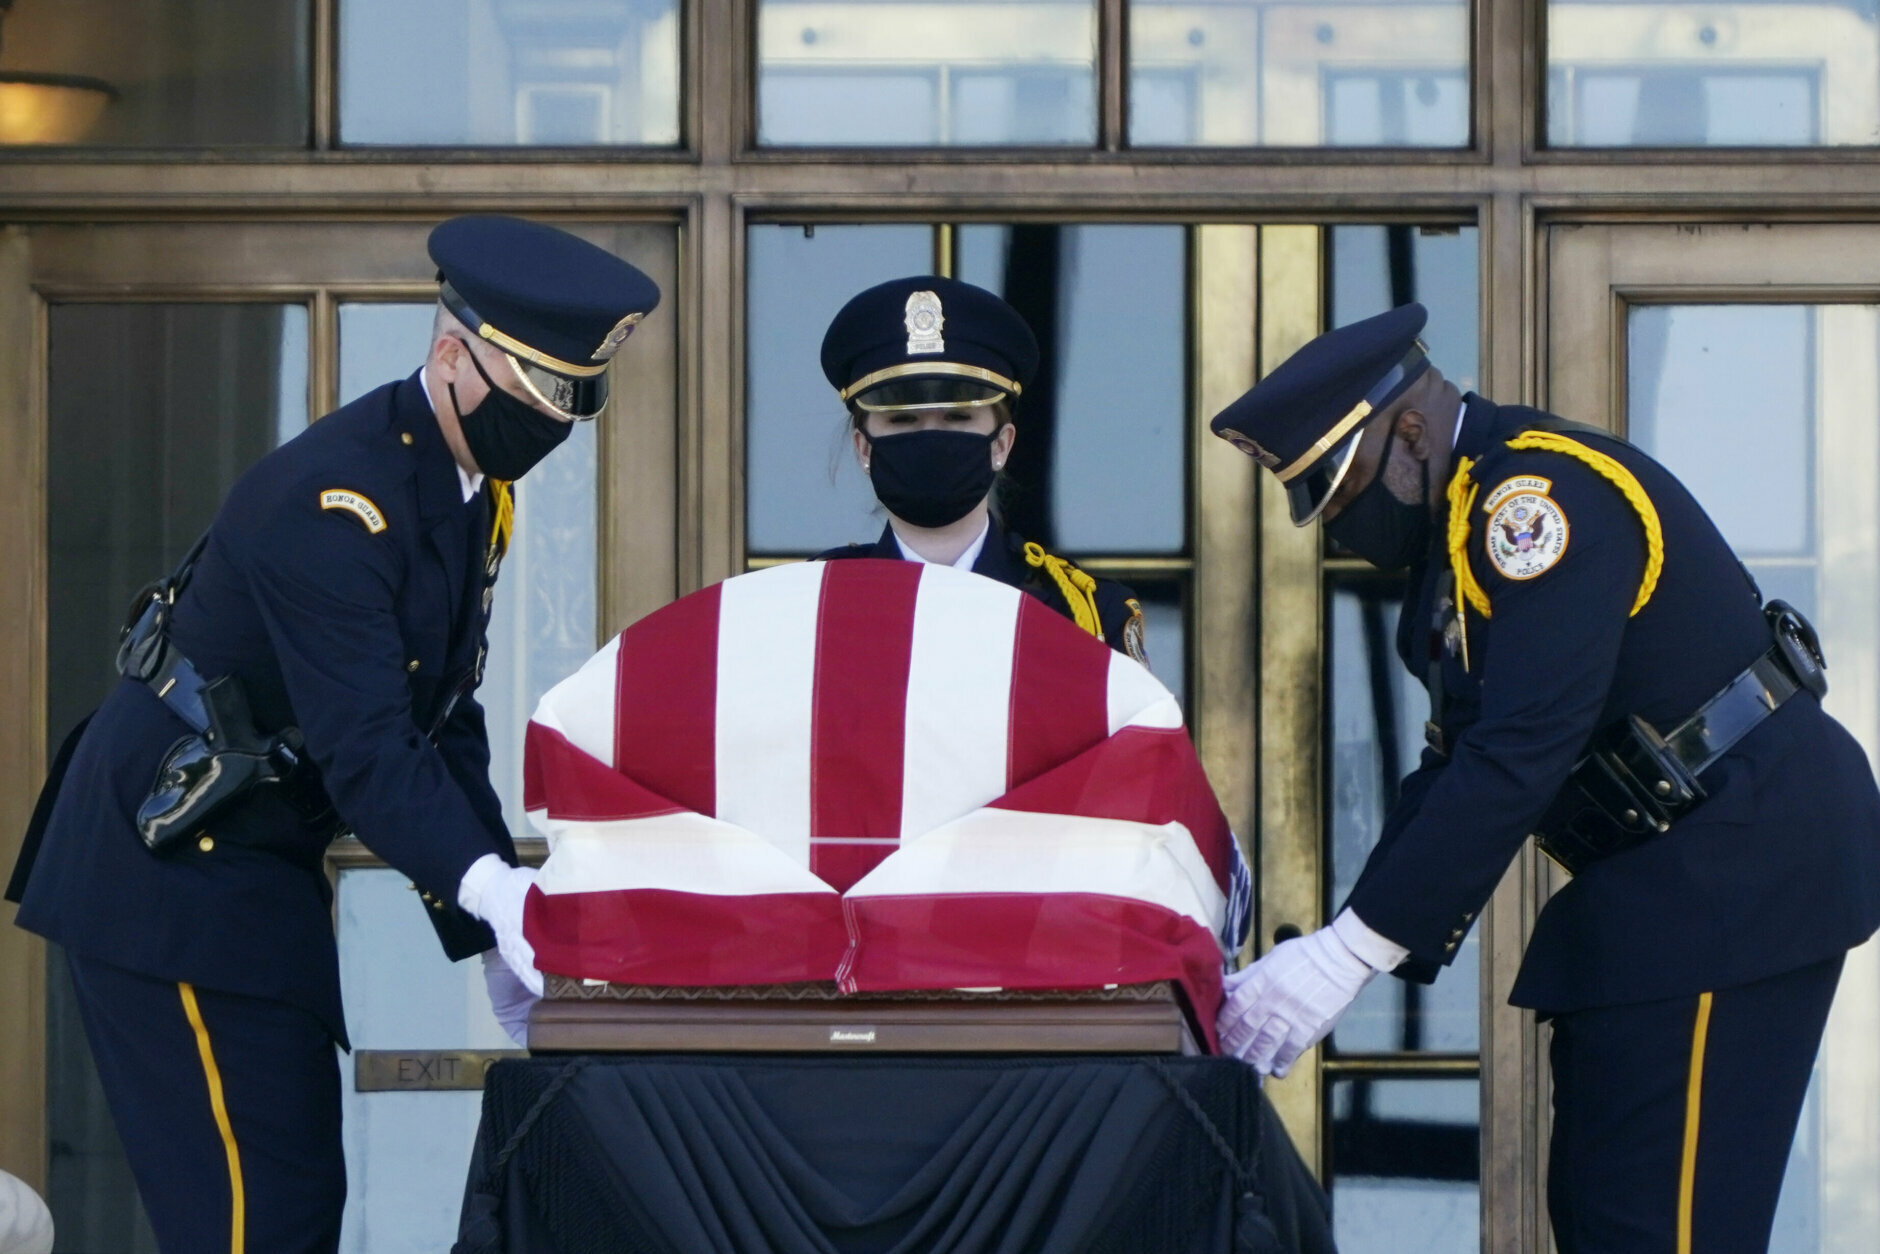 The flag-draped casket of Justice Ruth Bader Ginsburg lies in repose under the Portico at the top of the front steps of the U.S. Supreme Court building on Wednesday, Sept. 23, 2020, in Washington. Ginsburg, 87, died of cancer on Sept. 18. (AP Photo/J. Scott Applewhite)